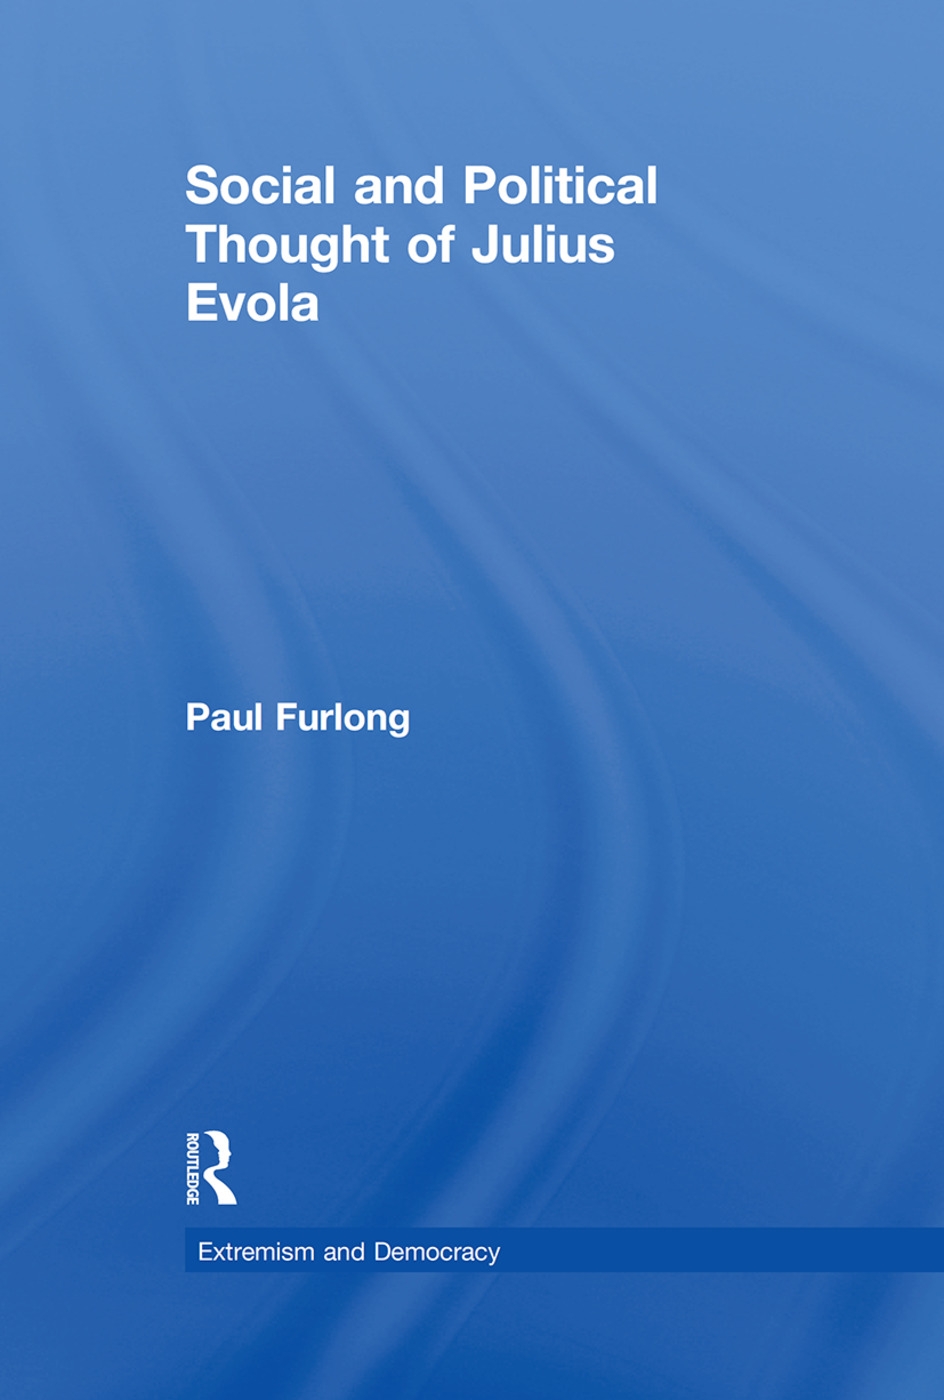 Social and Political Thought of Julius Evola